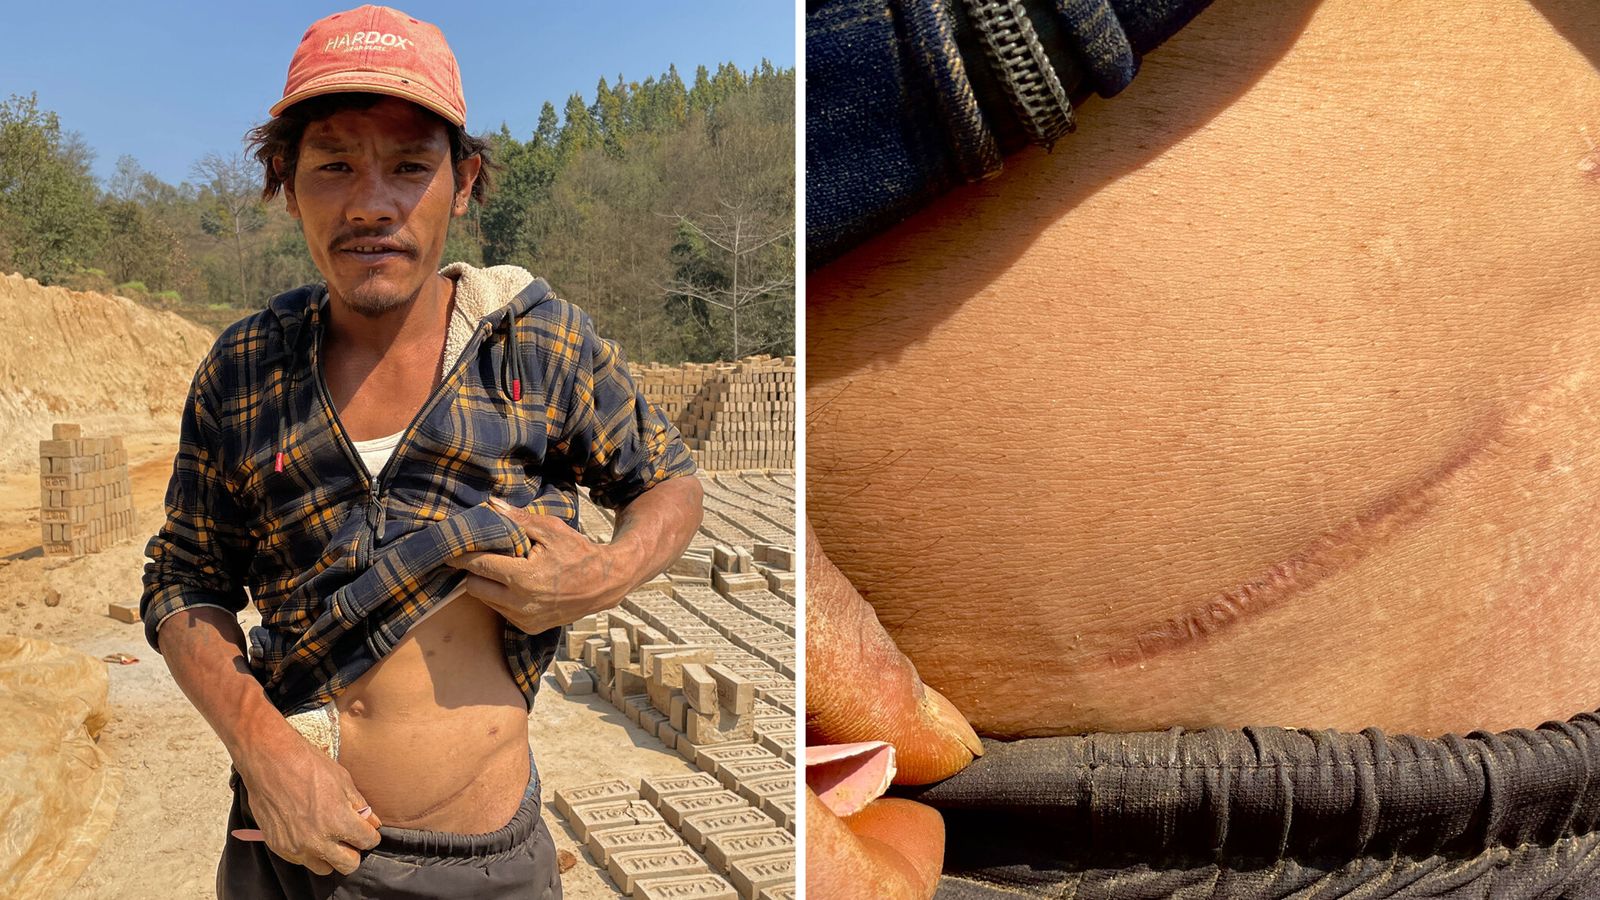 Nepal villagers duped into selling kidneys and told organ would regrow - now country faces new health crisis